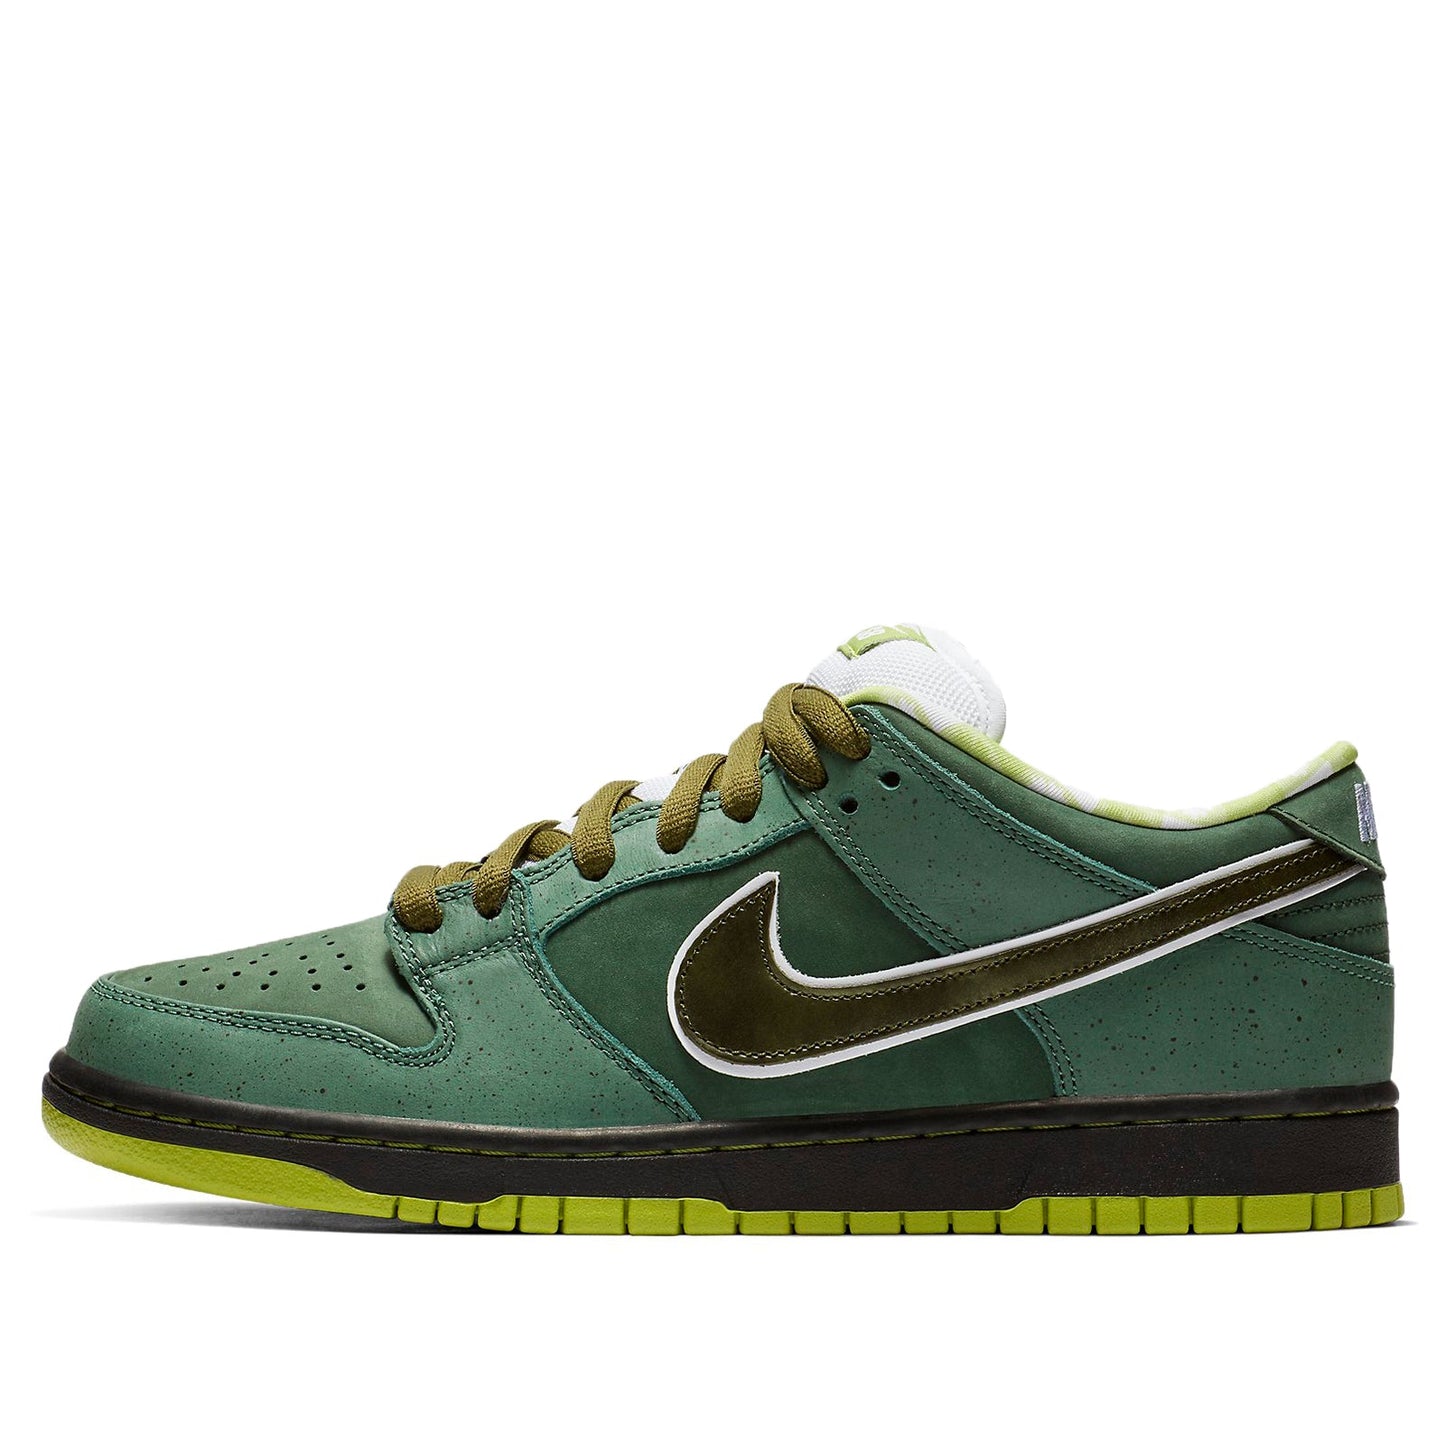 Nike x Concepts SB Dunk Low 'Green Lobster'  BV1310-337 Antique Icons